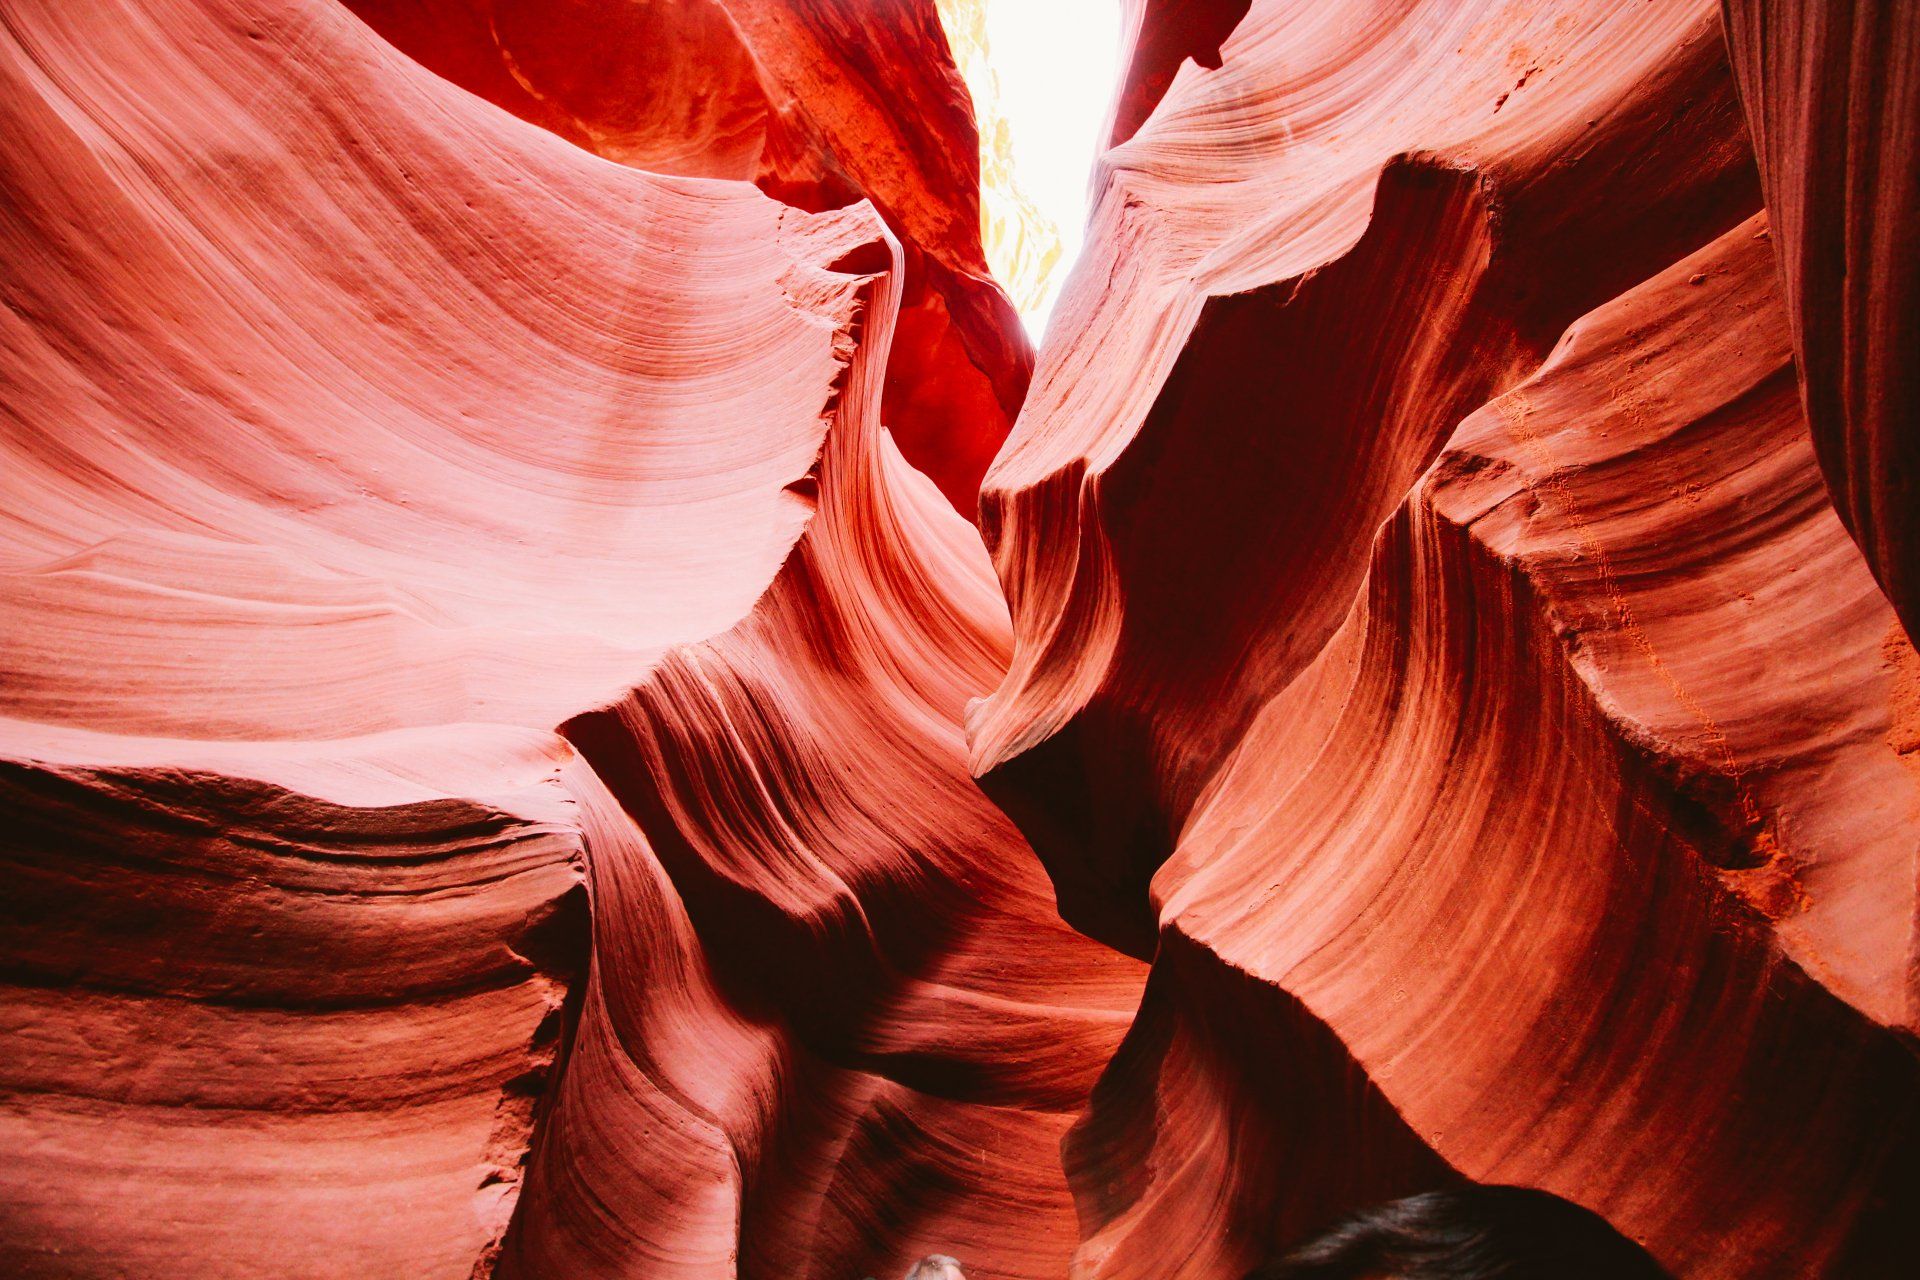 The most popular Antelope Canyon Tour package